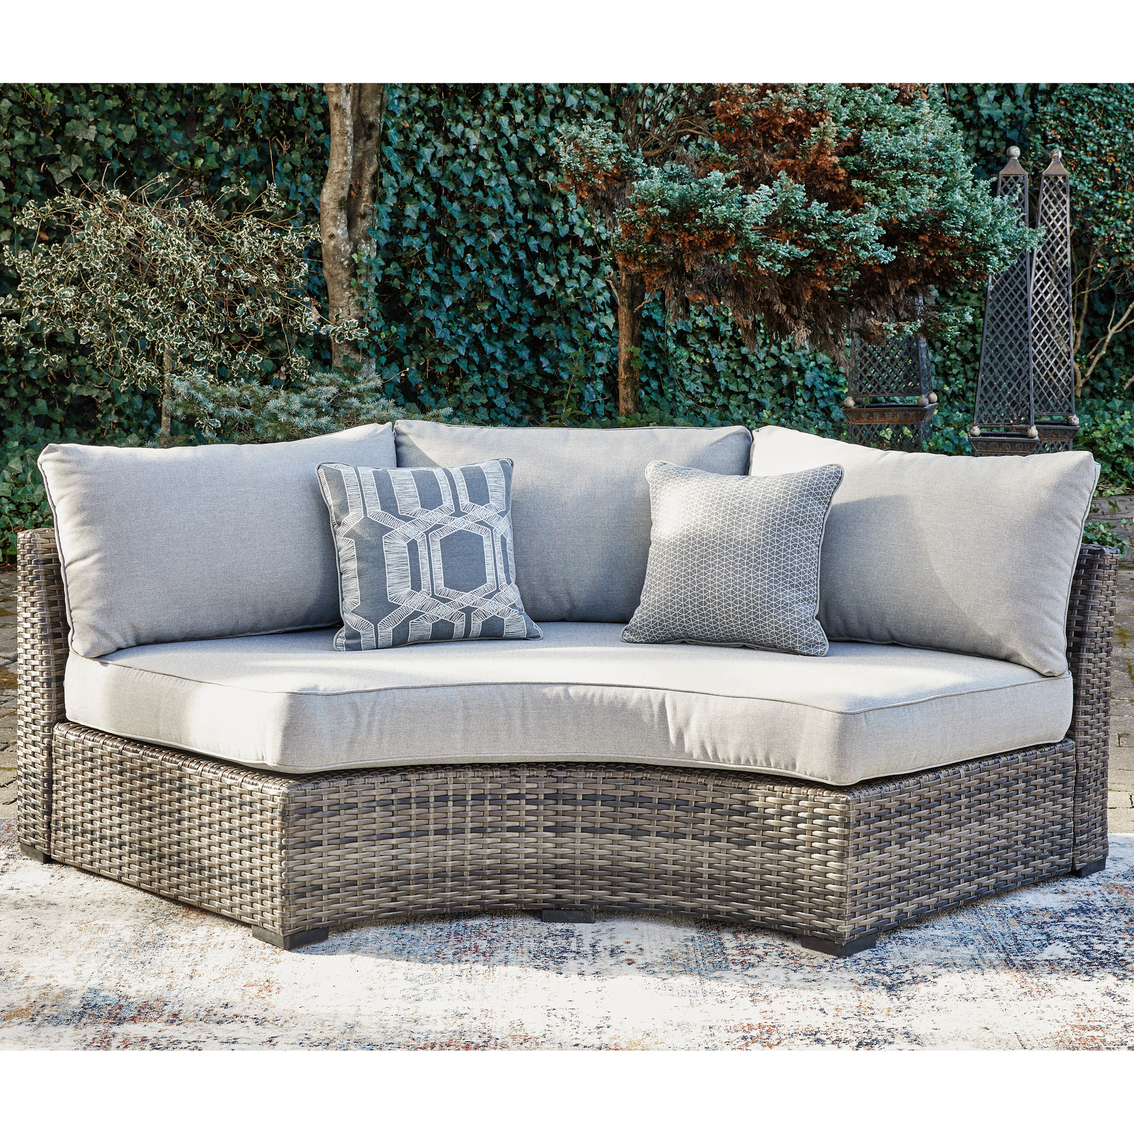 Signature Design by Ashley Harbor Court Curved Loveseat with Cushion - Image 4 of 5